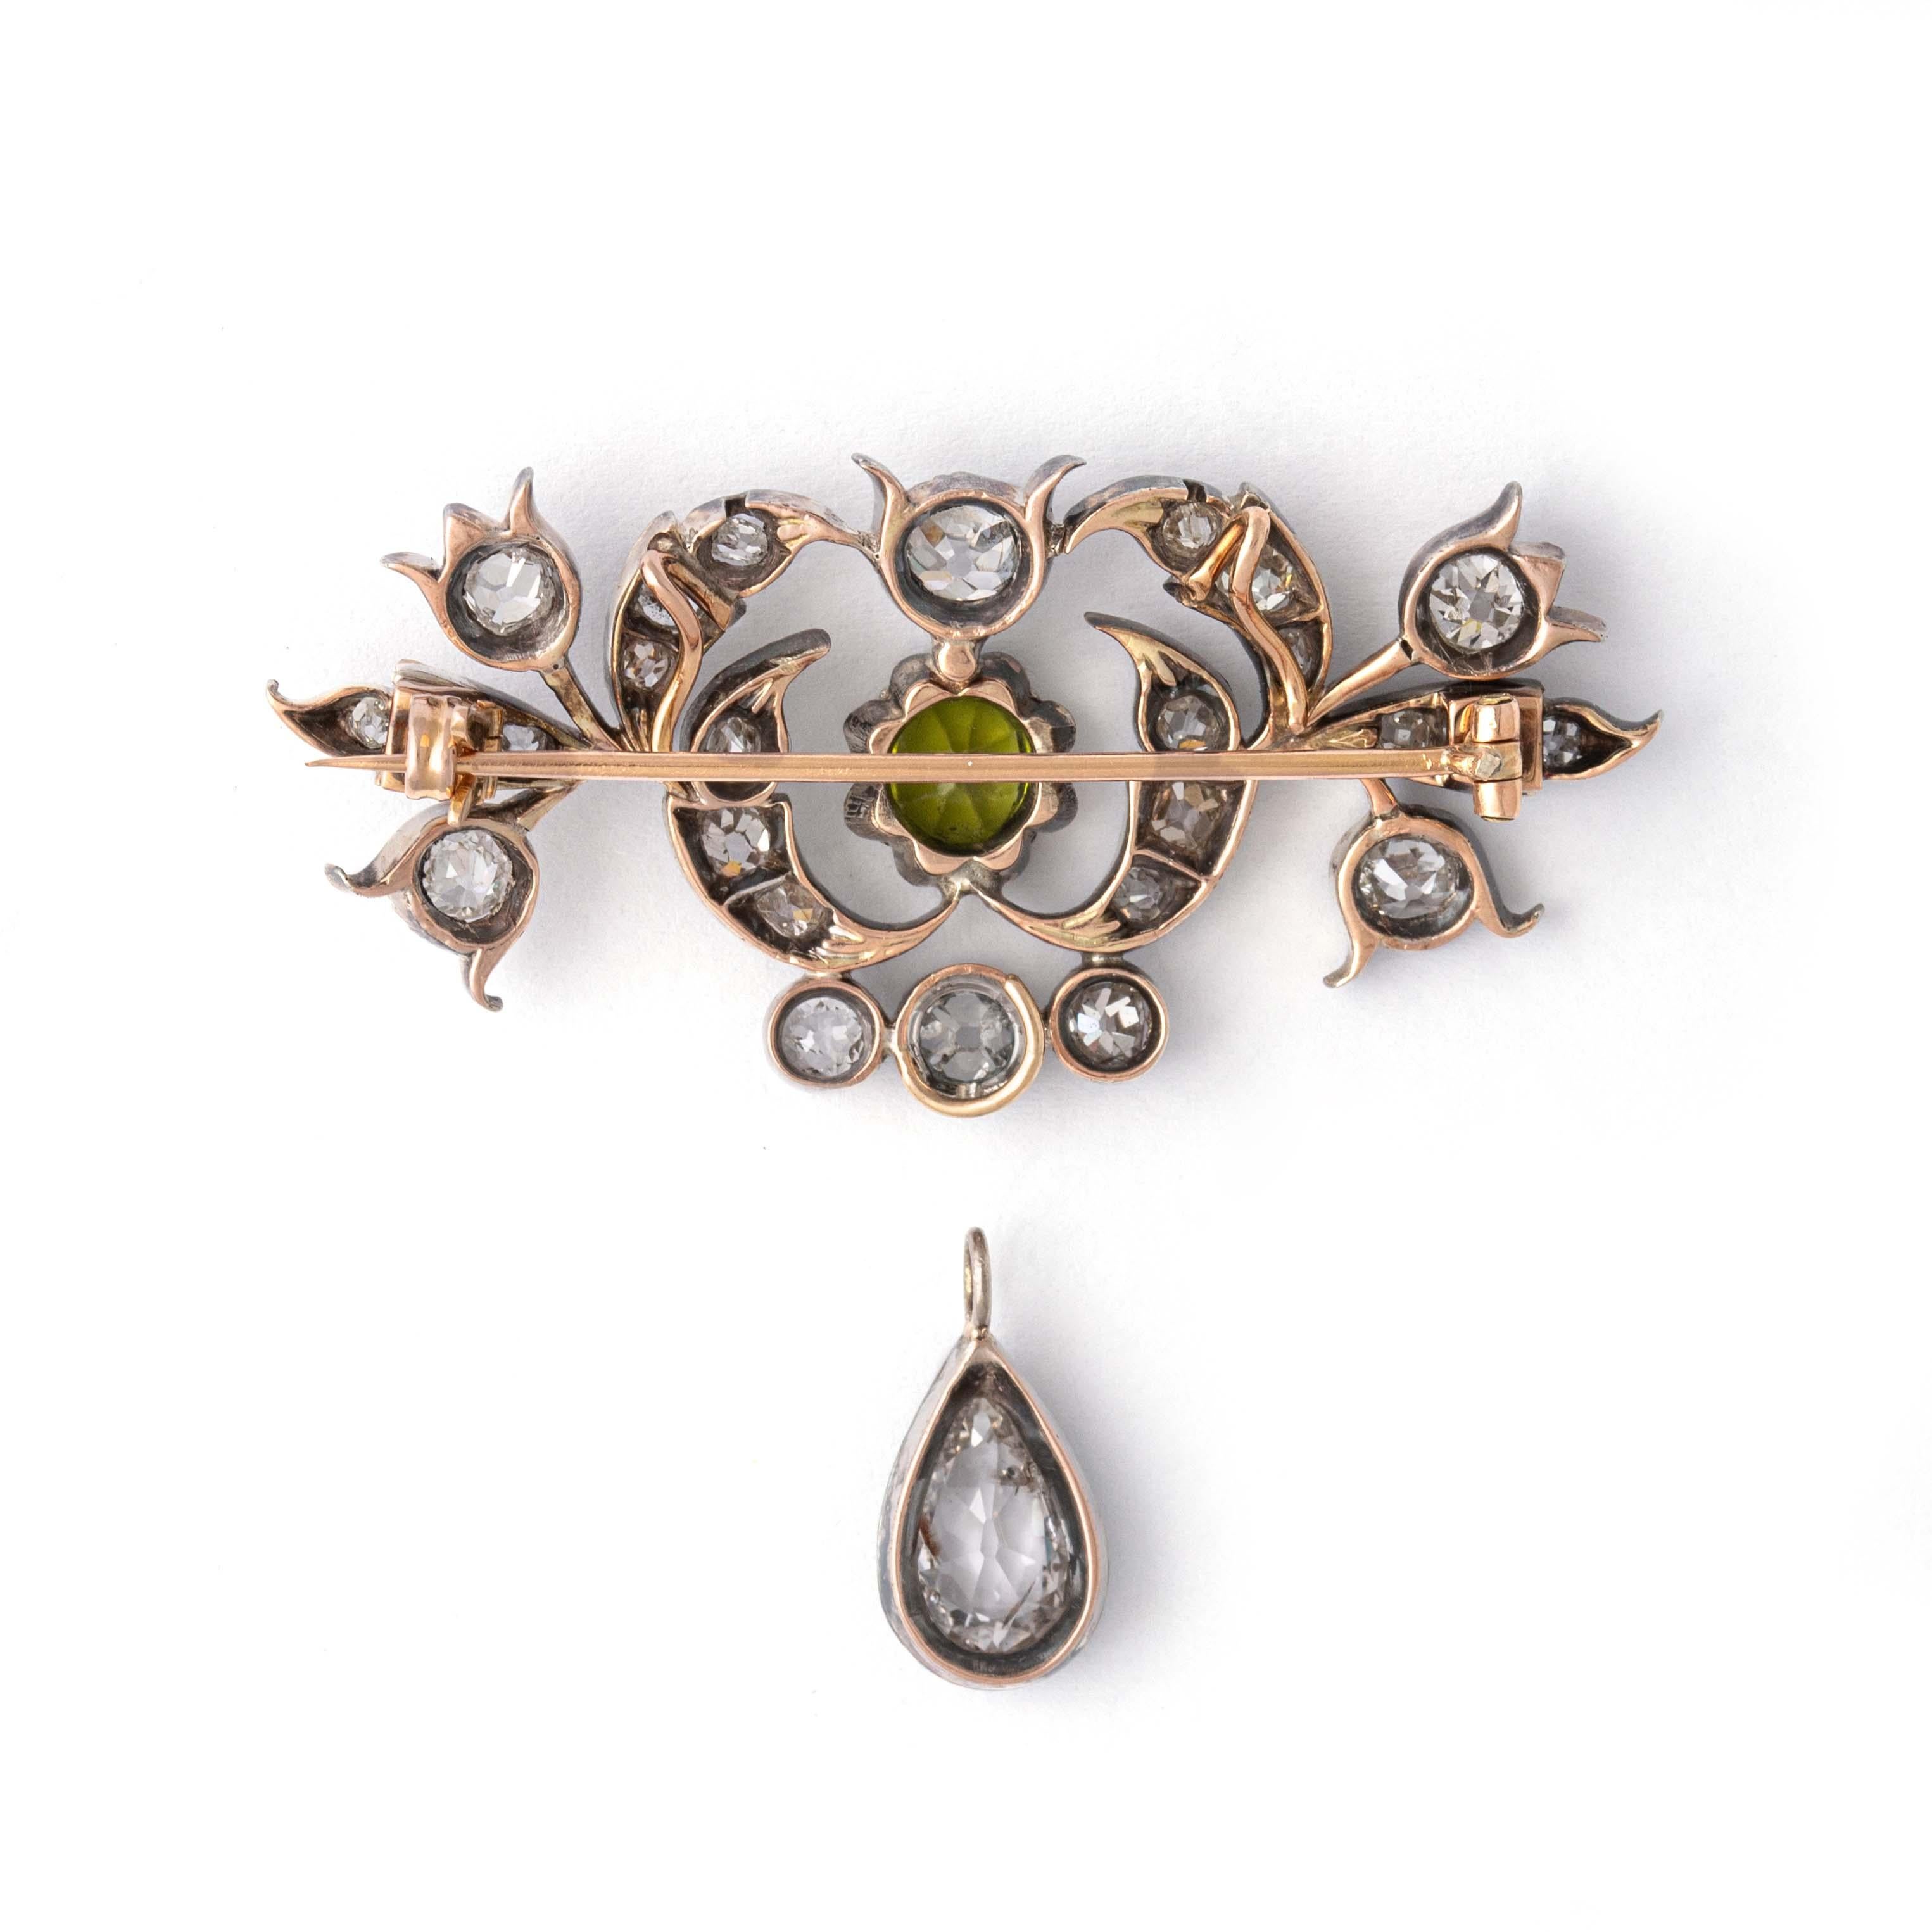 Antique Diamond and Peridot Brooch Pendant Late 19th Century For Sale 8